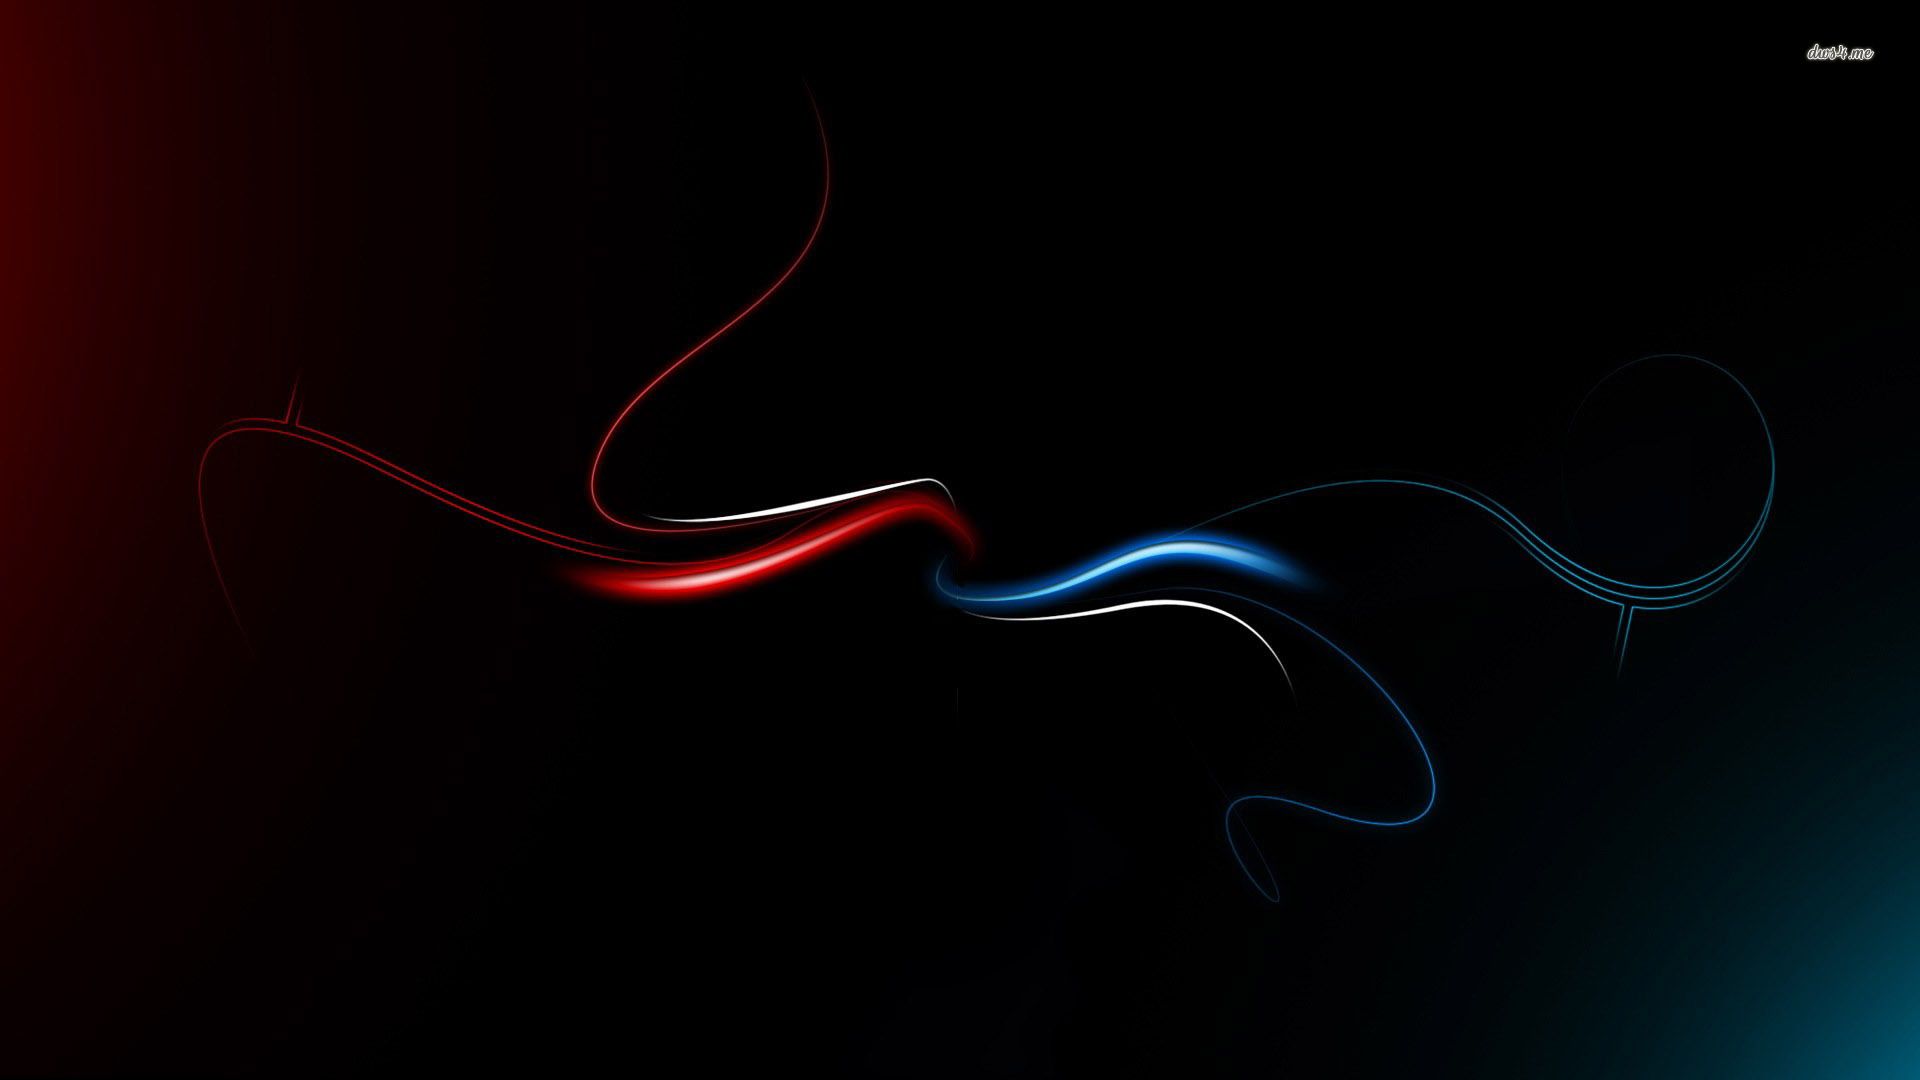 Red and blue curves wallpaper - Abstract wallpapers - #10462